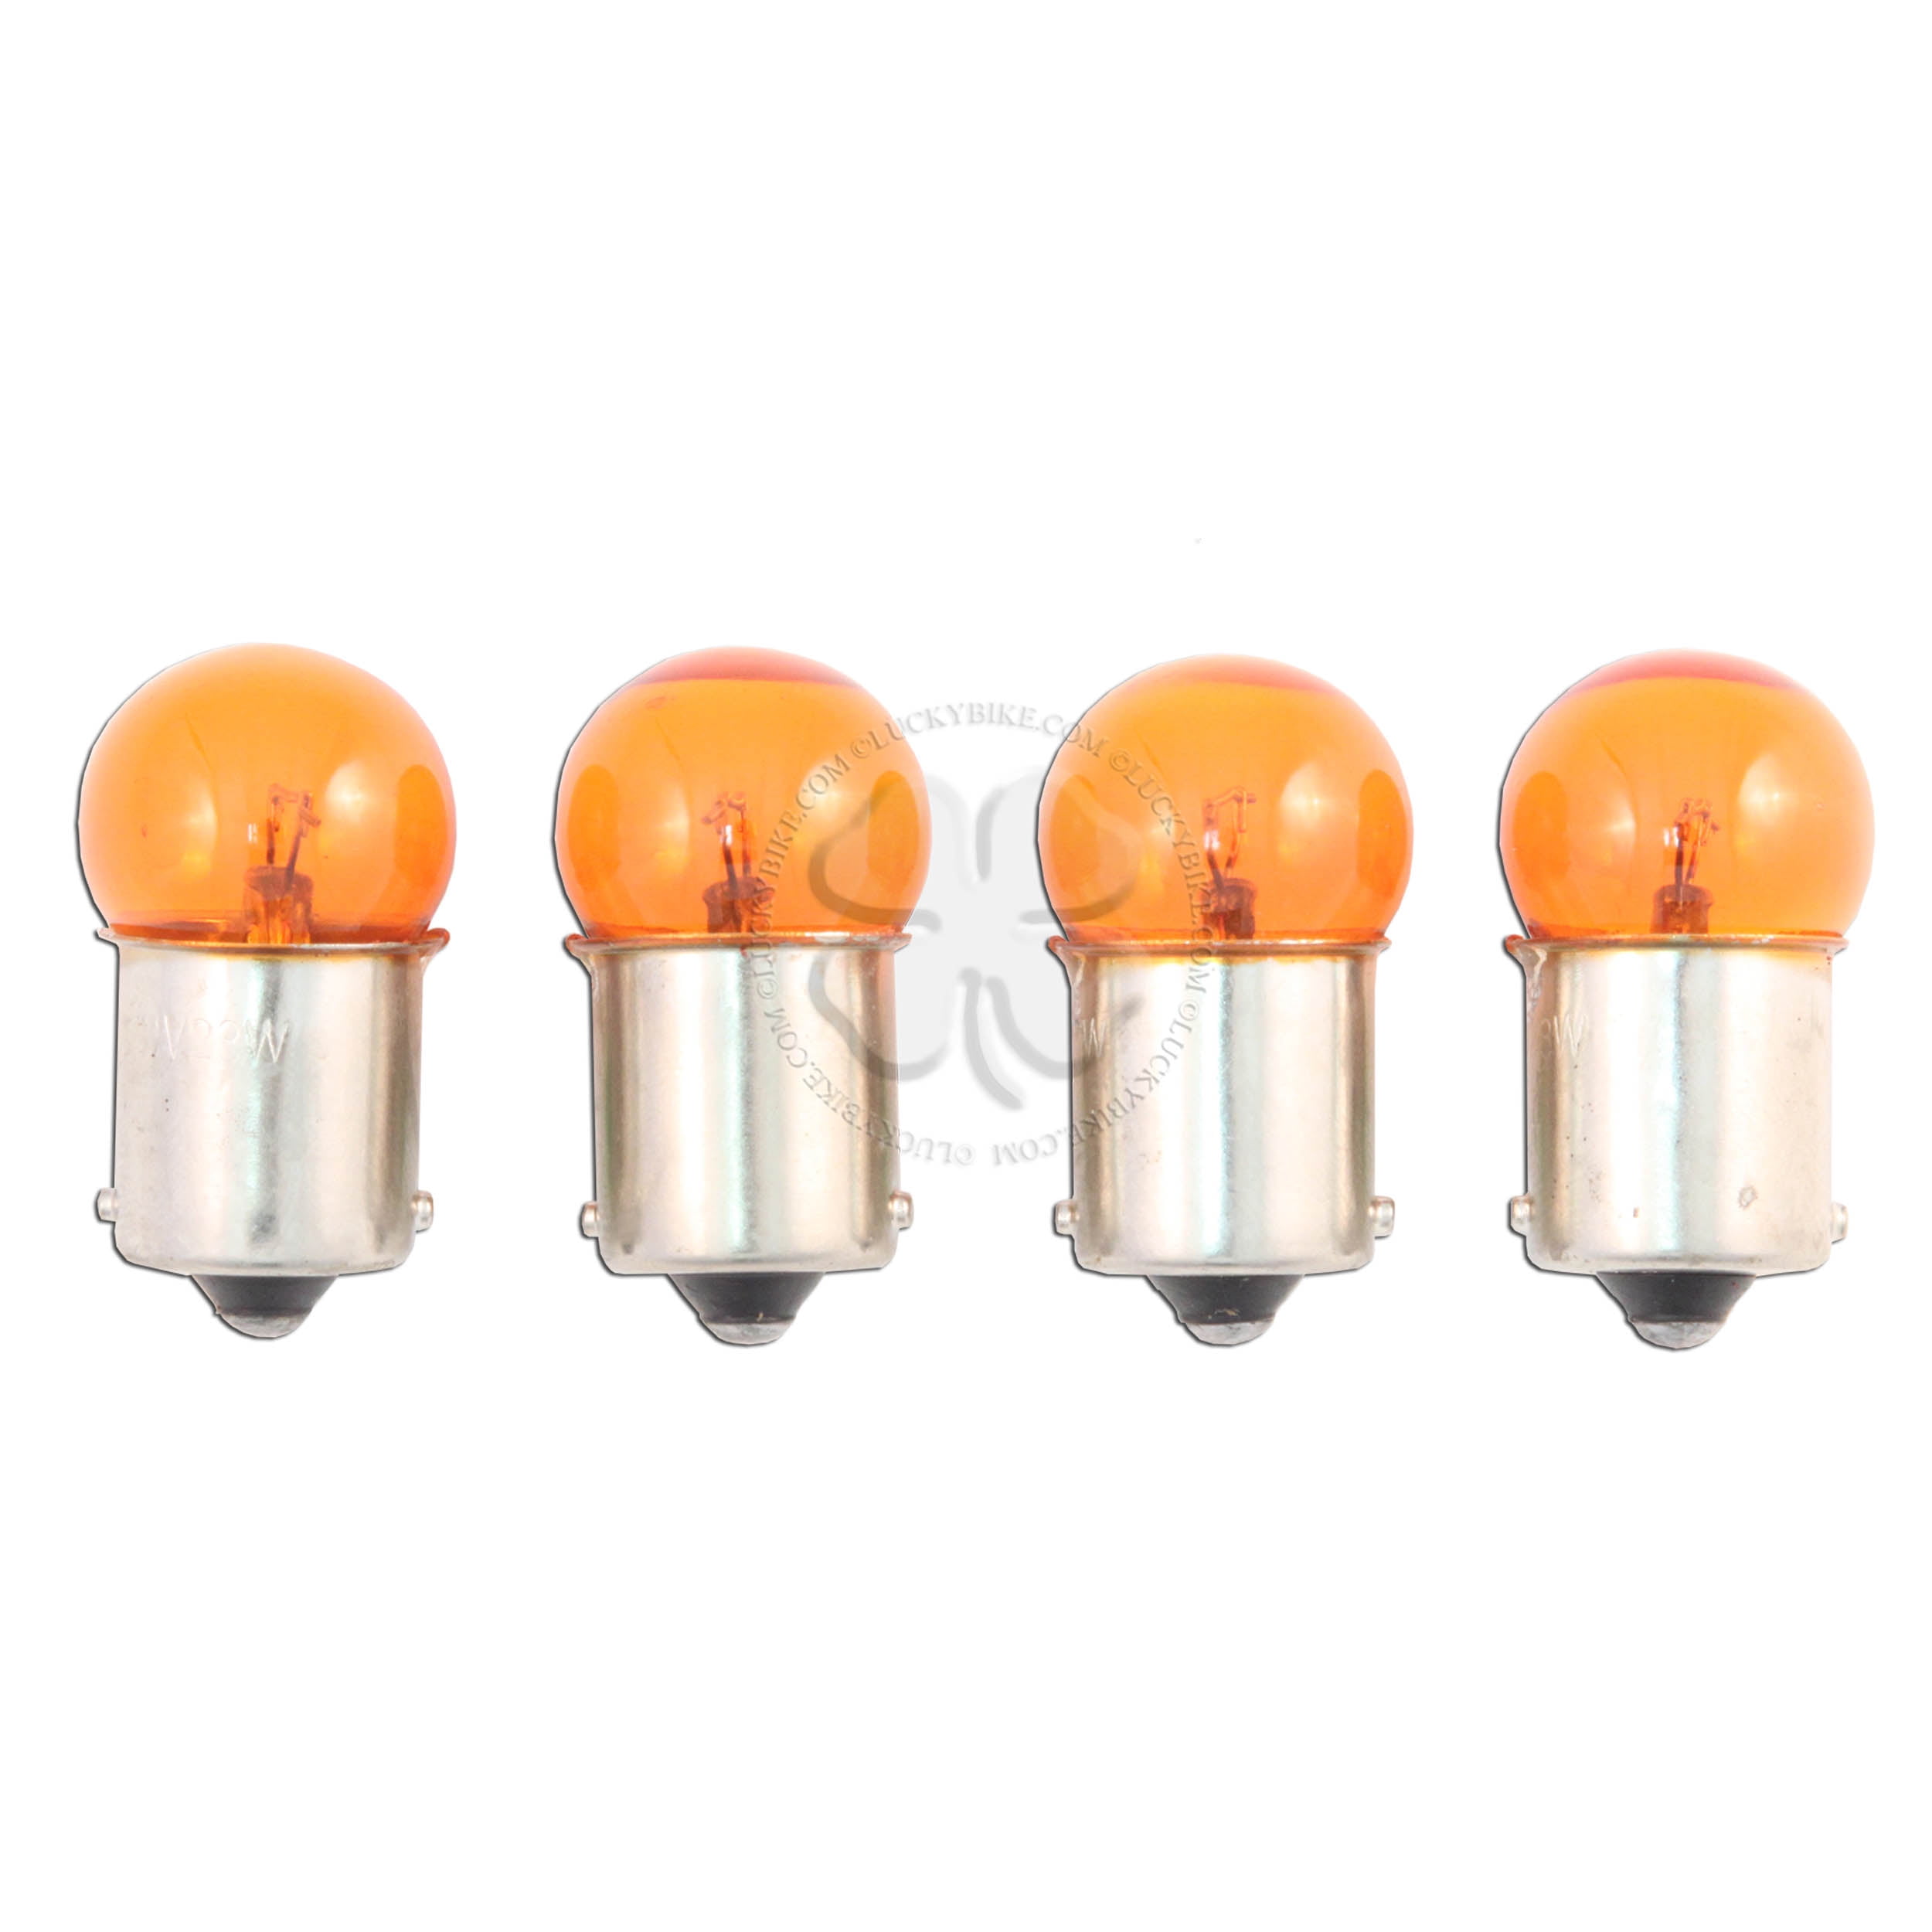 LED Light 5W 1156 Amber Orange Two Bulbs Front Turn Signal Replace Lamp Upgrade